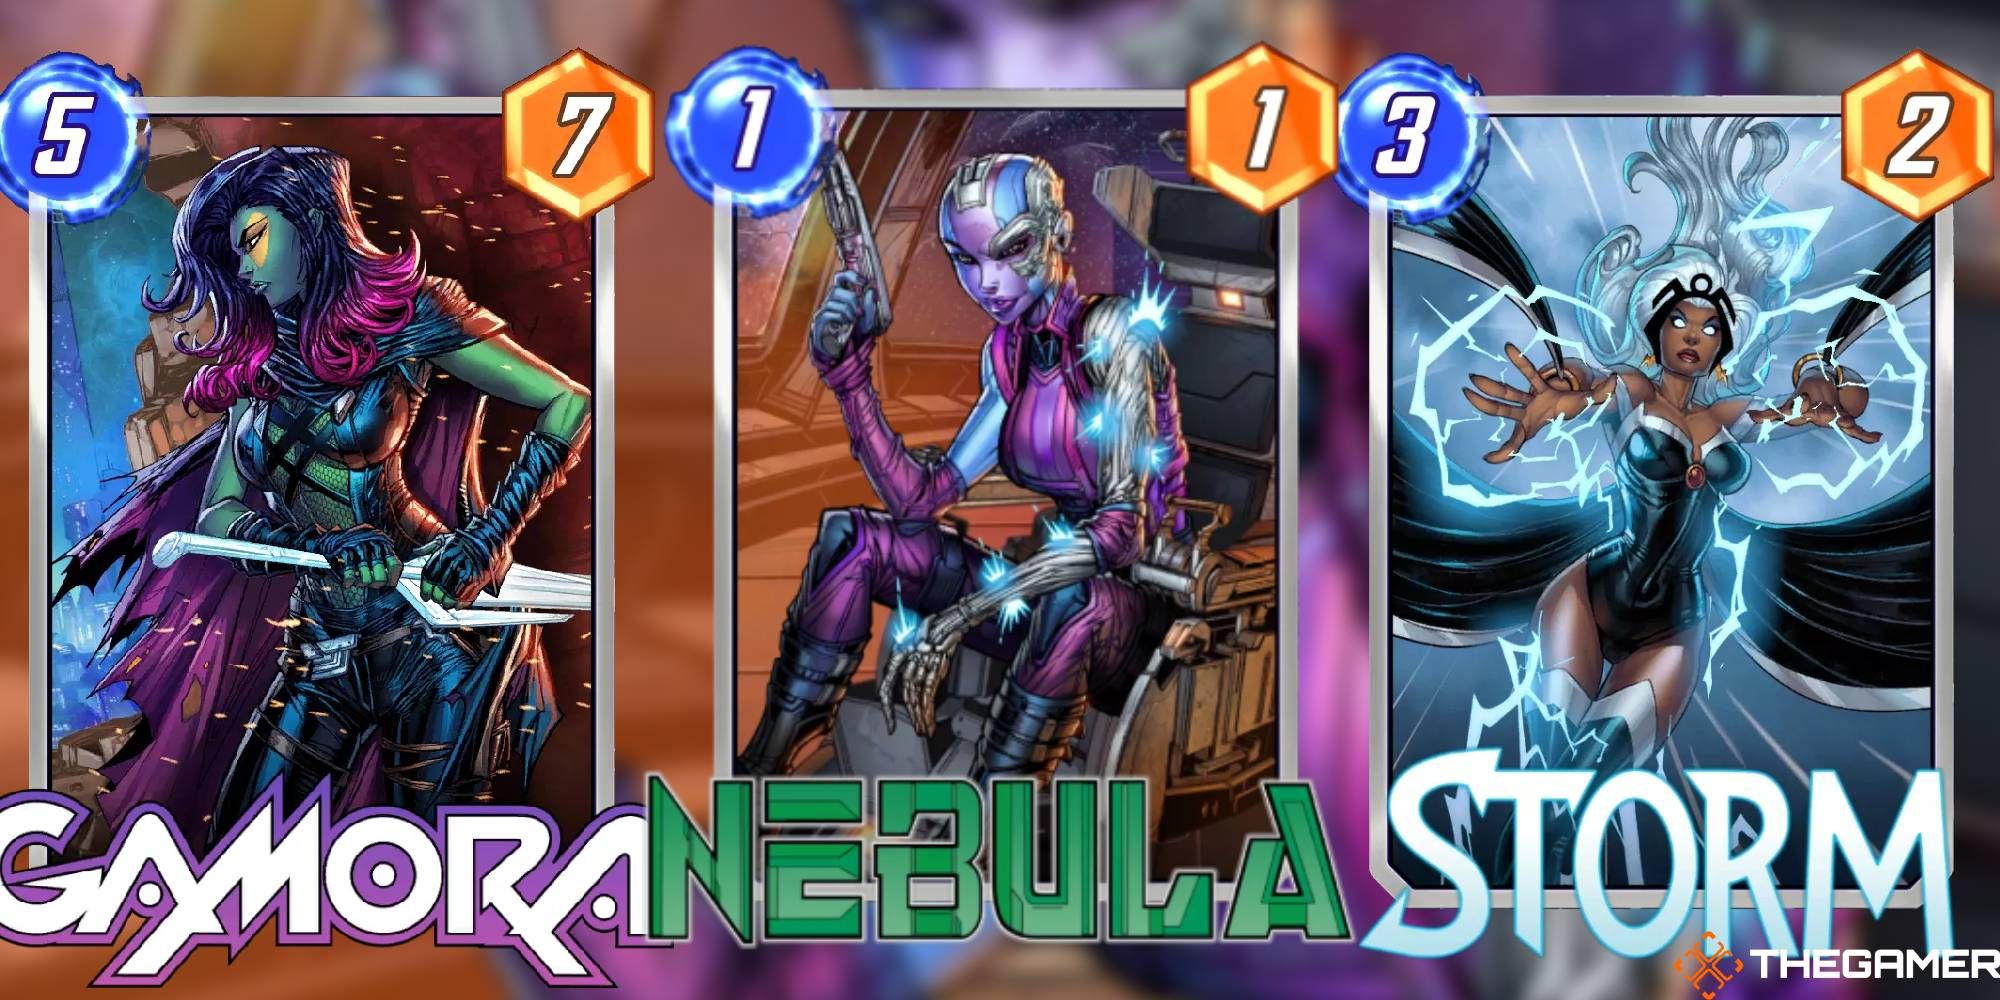 A collage of Marvel Snap Nebula Deck featuring Gamora, Nebula, and Storm.